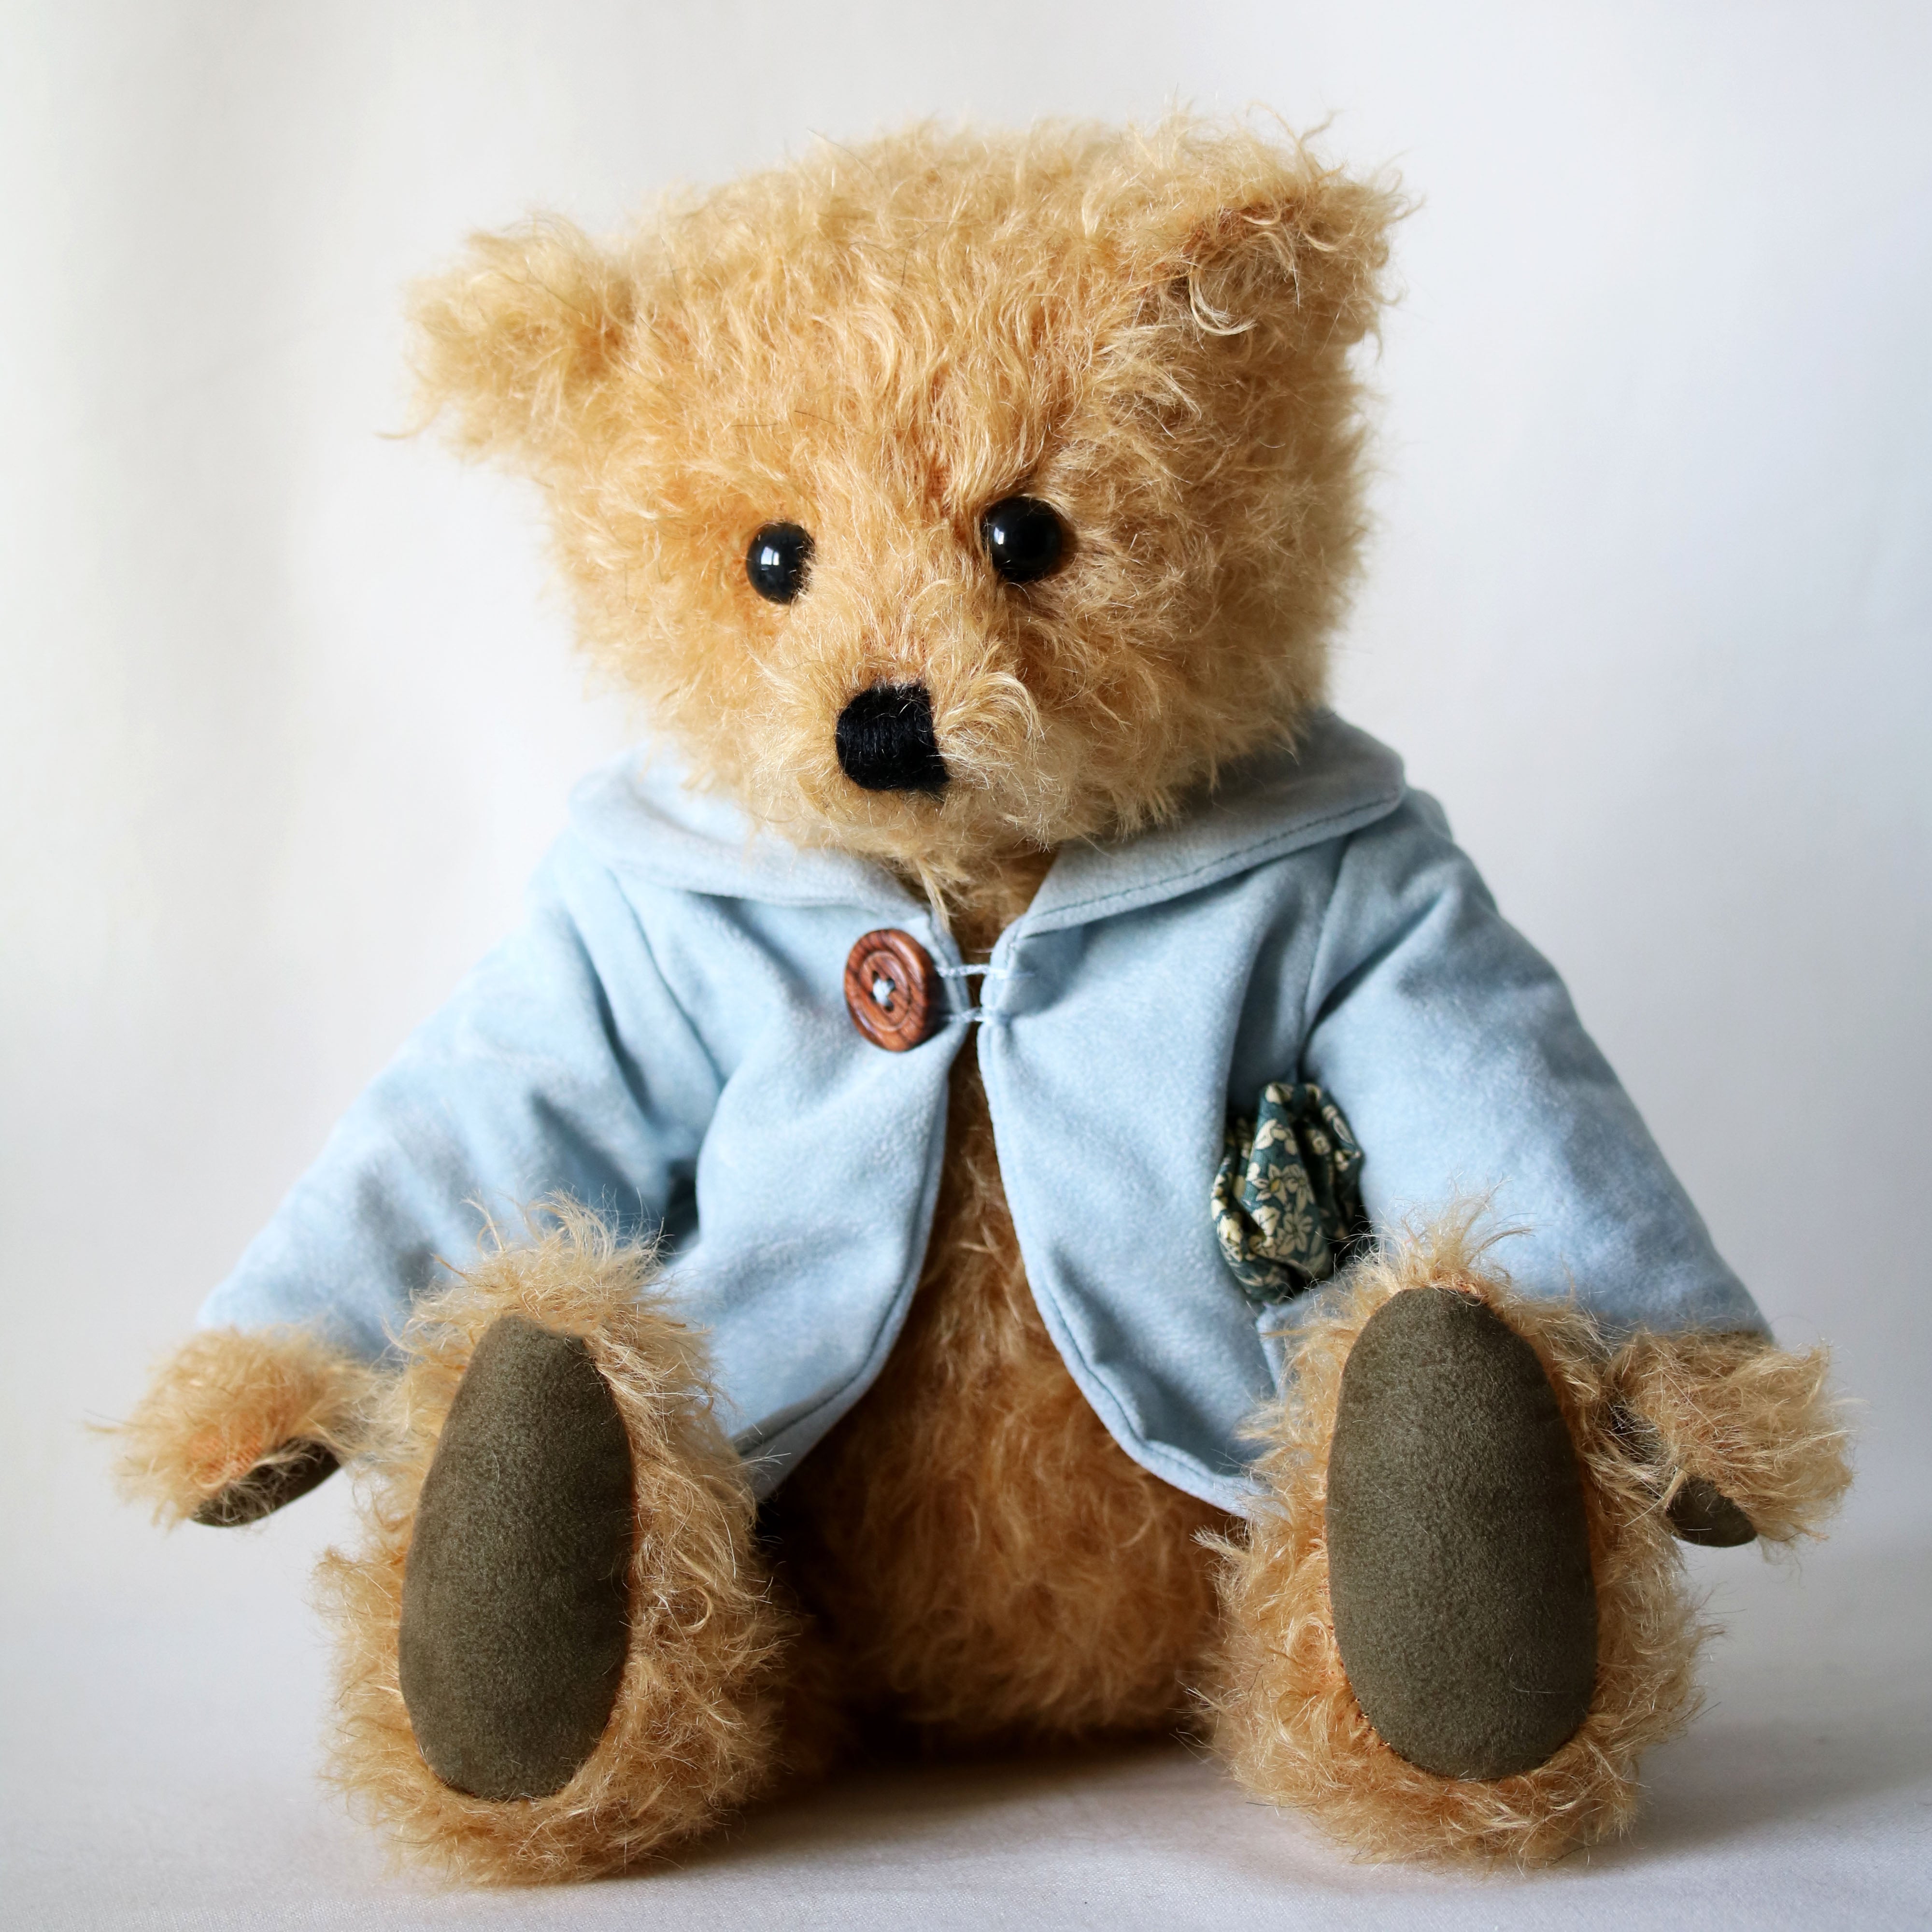 Christopher the Bear by Canterbury Bears